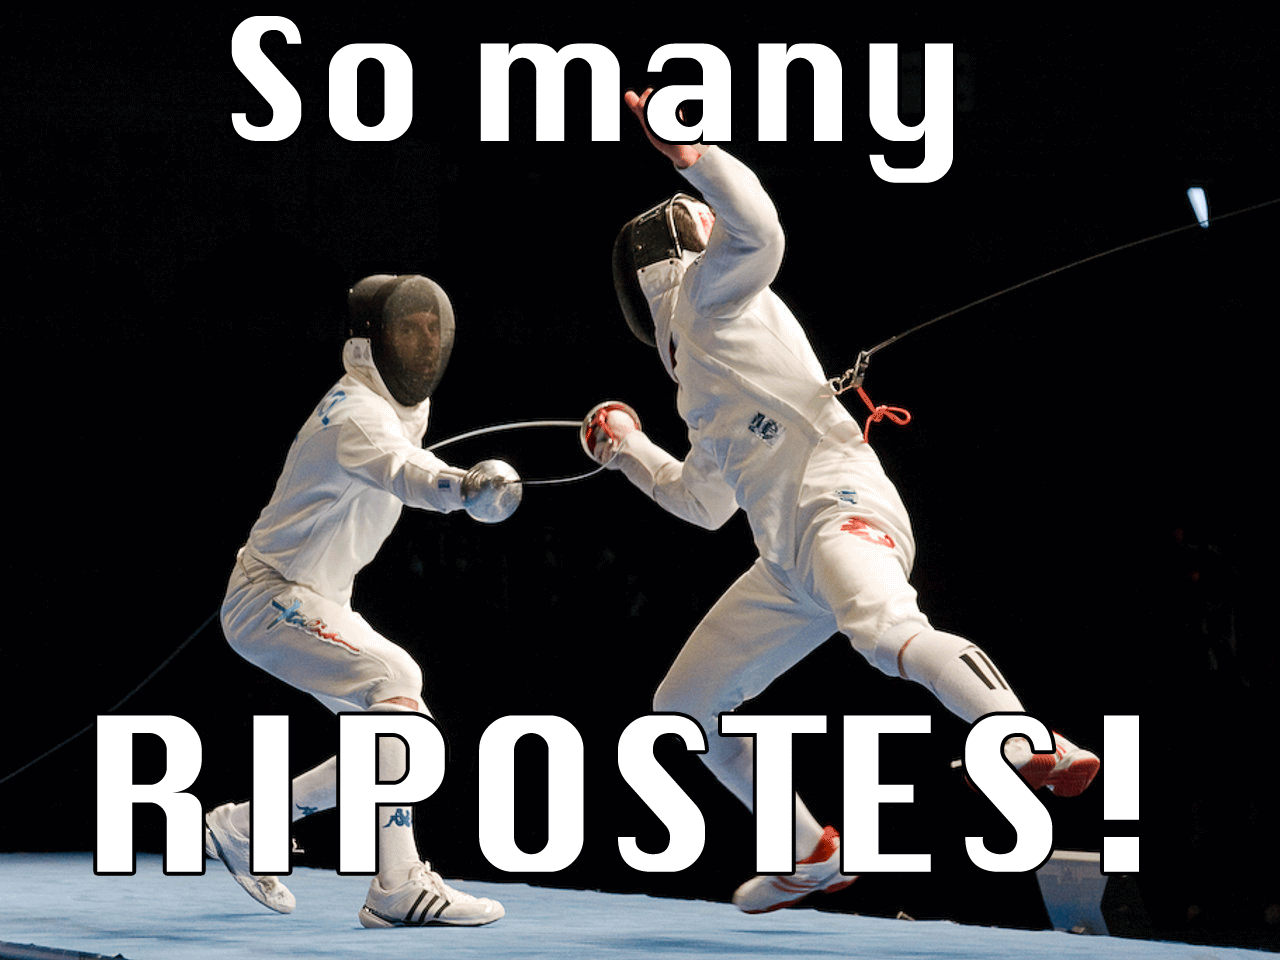 So Many Ripostes Funny Fencing Image